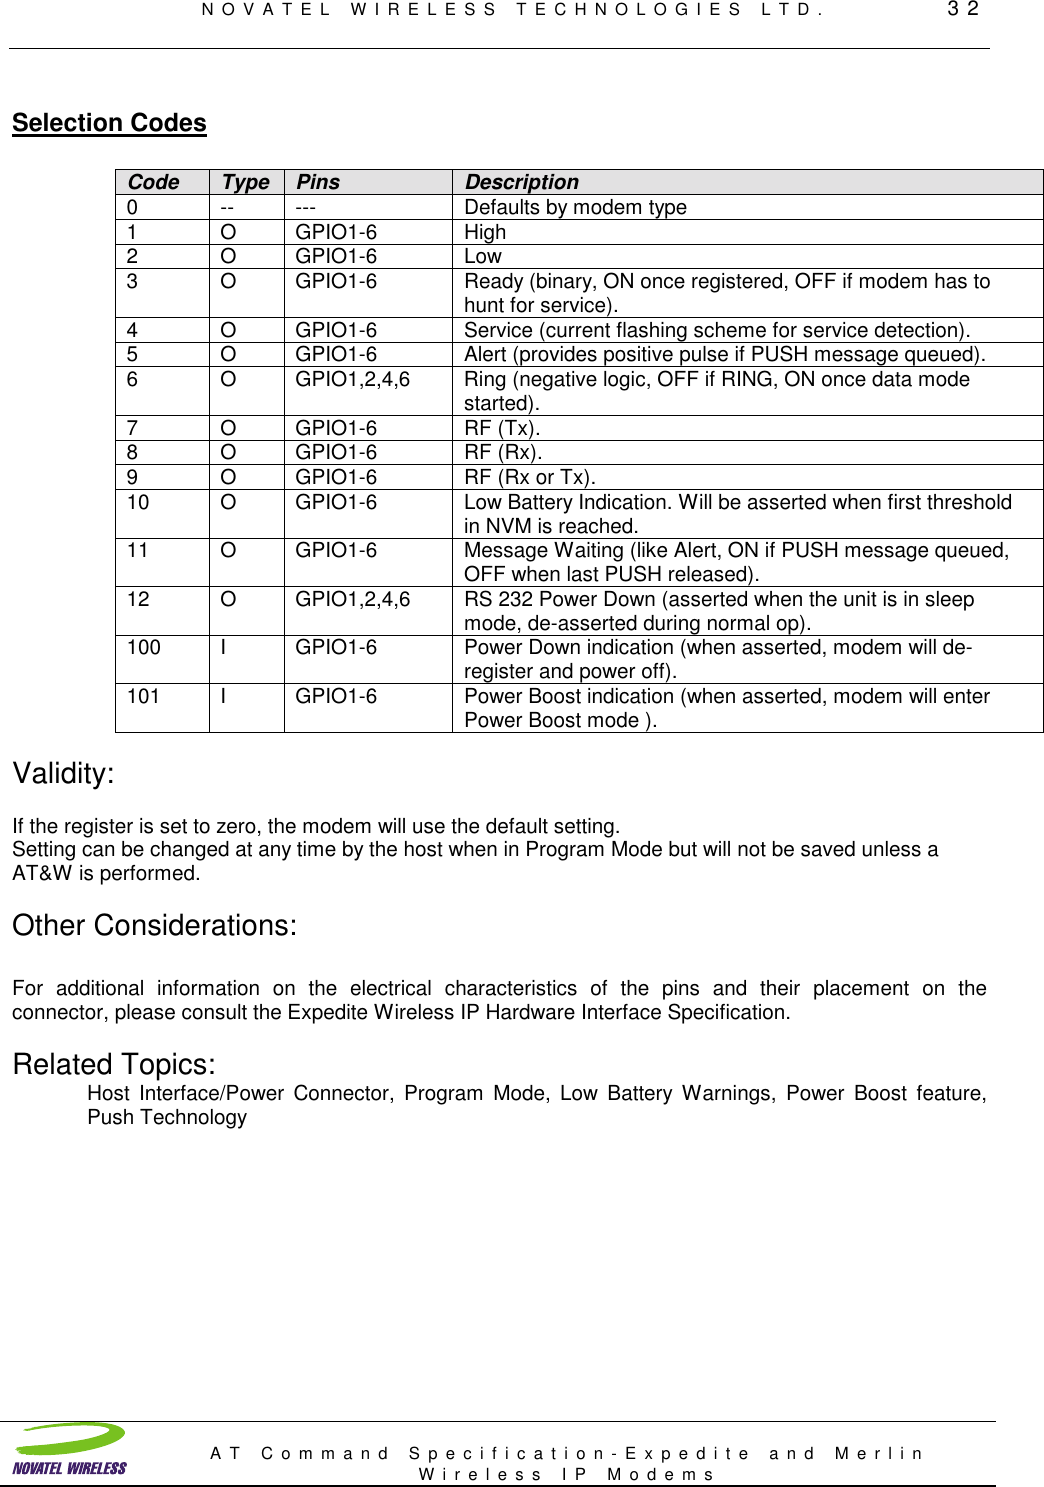 NOVATEL WIRELESS TECHNOLOGIES LTD.         32AT Command Specification-Expedite and MerlinWireless IP ModemsSelection CodesCode Type Pins Description0 -- --- Defaults by modem type1OGPIO1-6 High2 O GPIO1-6 Low3 O GPIO1-6 Ready (binary, ON once registered, OFF if modem has tohunt for service).4 O GPIO1-6 Service (current flashing scheme for service detection).5 O GPIO1-6 Alert (provides positive pulse if PUSH message queued).6 O GPIO1,2,4,6 Ring (negative logic, OFF if RING, ON once data modestarted).7OGPIO1-6 RF (Tx).8OGPIO1-6 RF (Rx).9 O GPIO1-6 RF (Rx or Tx).10 O GPIO1-6 Low Battery Indication. Will be asserted when first thresholdin NVM is reached.11 O GPIO1-6 Message Waiting (like Alert, ON if PUSH message queued,OFF when last PUSH released).12 O GPIO1,2,4,6 RS 232 Power Down (asserted when the unit is in sleepmode, de-asserted during normal op).100 I GPIO1-6 Power Down indication (when asserted, modem will de-register and power off).101 I GPIO1-6 Power Boost indication (when asserted, modem will enterPower Boost mode ).Validity:If the register is set to zero, the modem will use the default setting.Setting can be changed at any time by the host when in Program Mode but will not be saved unless aAT&amp;W is performed.Other Considerations:For additional information on the electrical characteristics of the pins and their placement on theconnector, please consult the Expedite Wireless IP Hardware Interface Specification.Related Topics:Host Interface/Power Connector, Program Mode, Low Battery Warnings, Power Boost feature,Push Technology